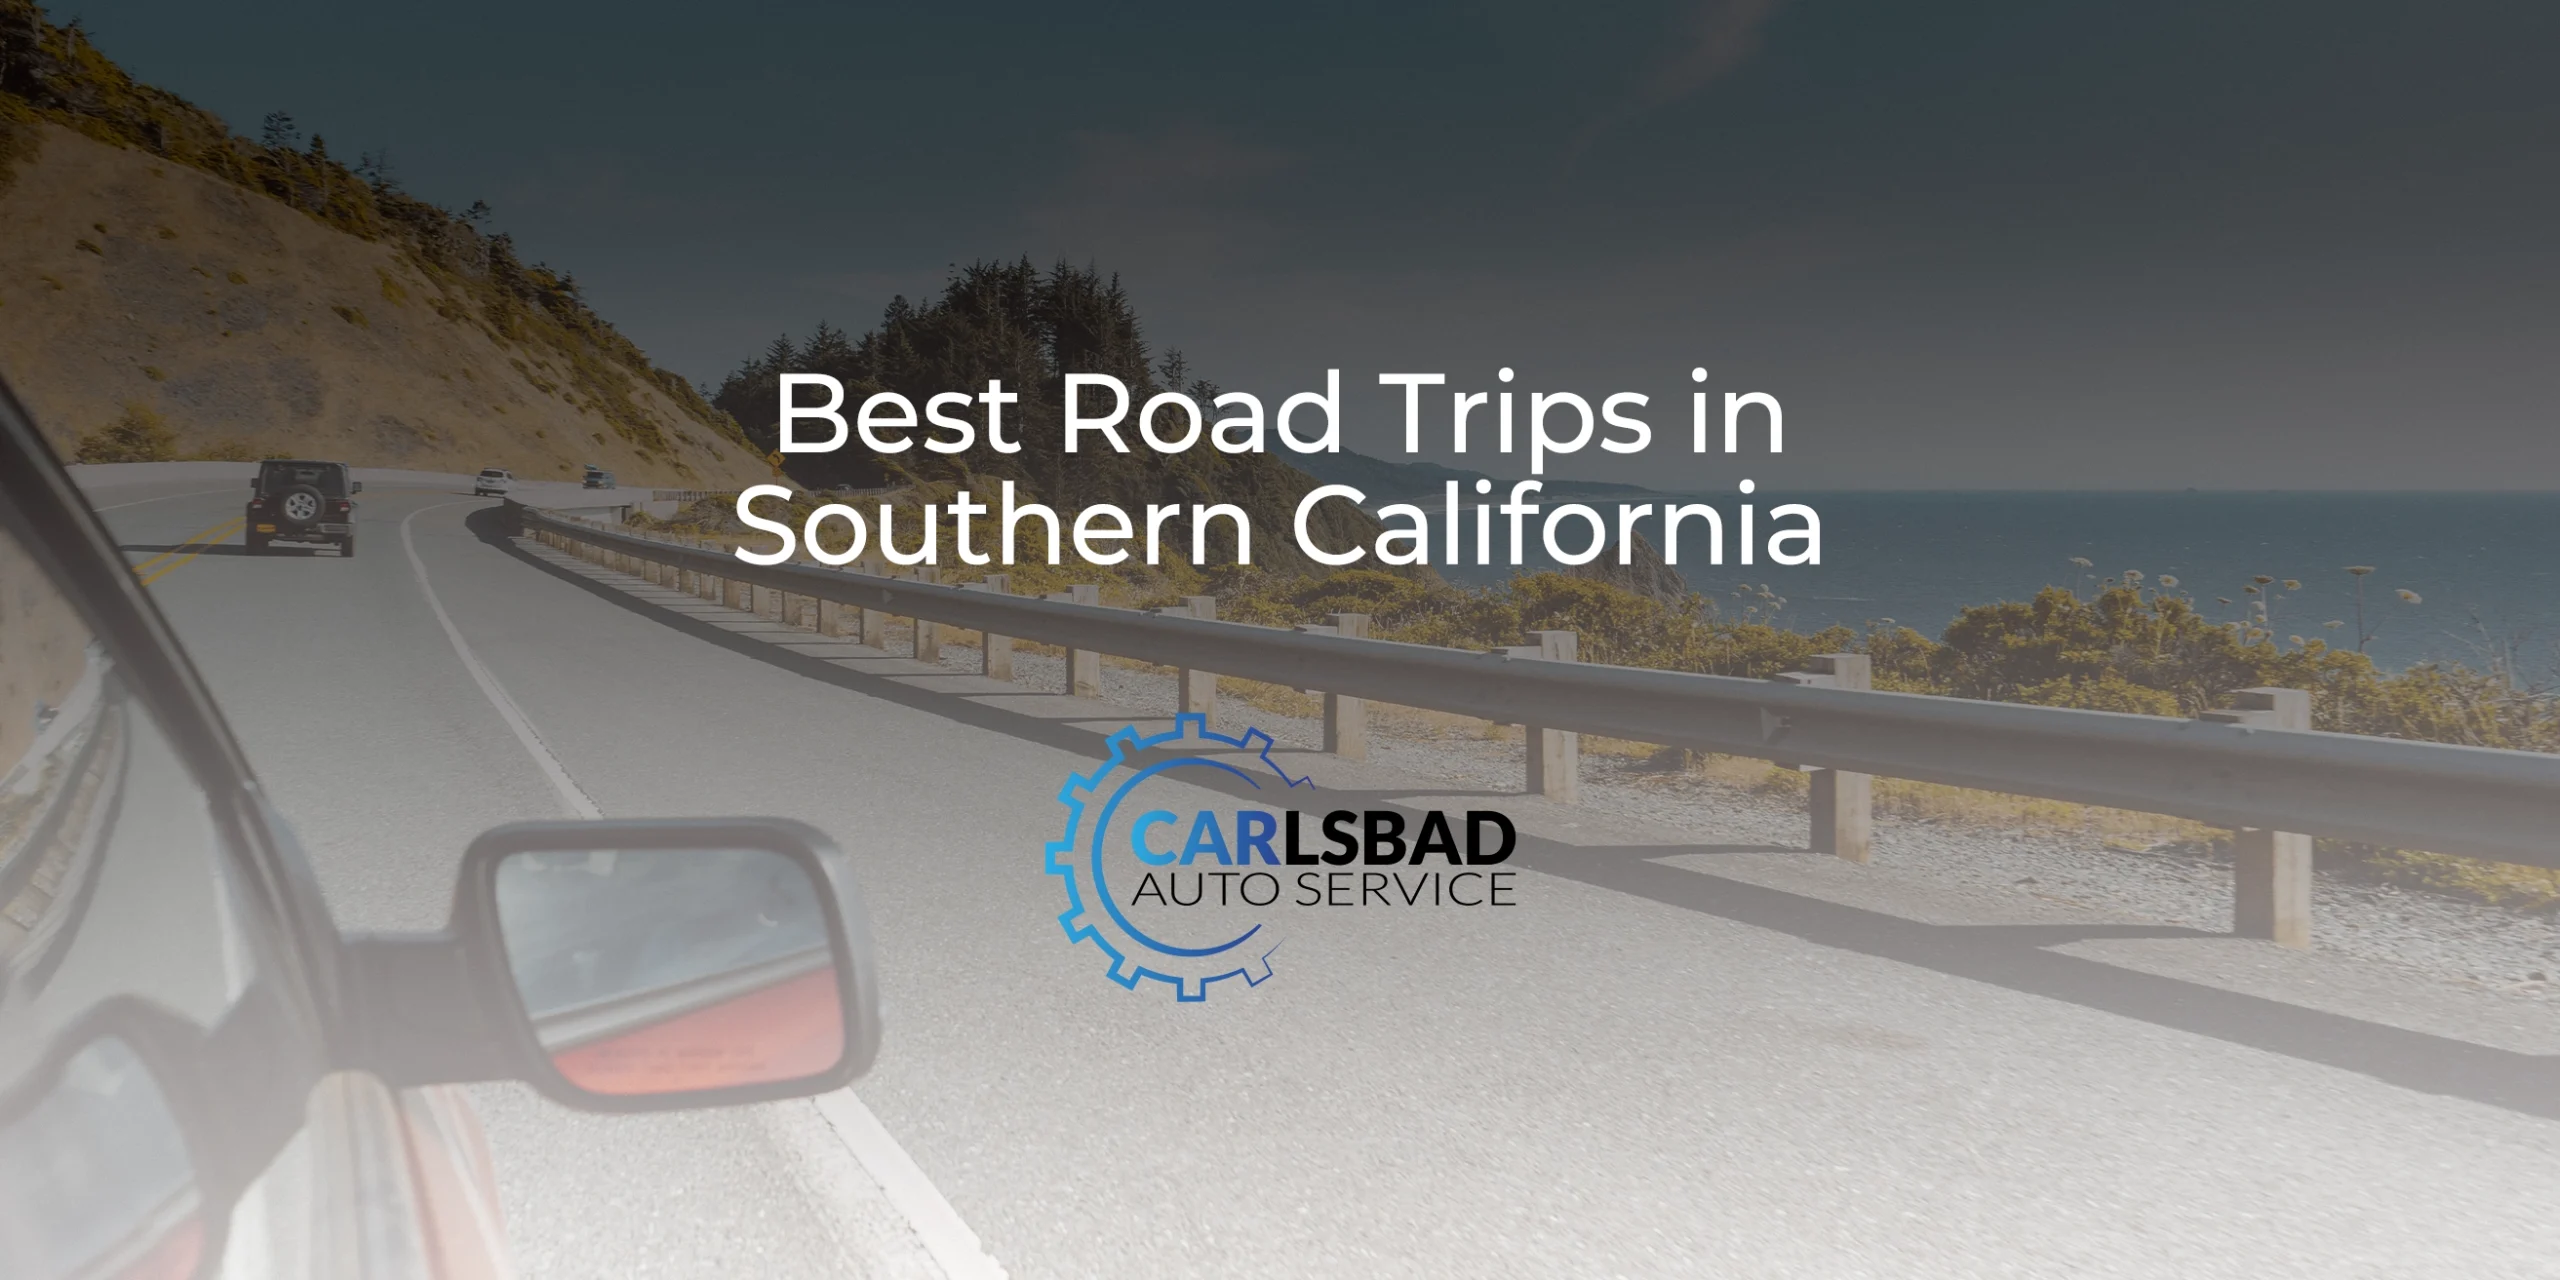 The Best Road Trips in Southern California